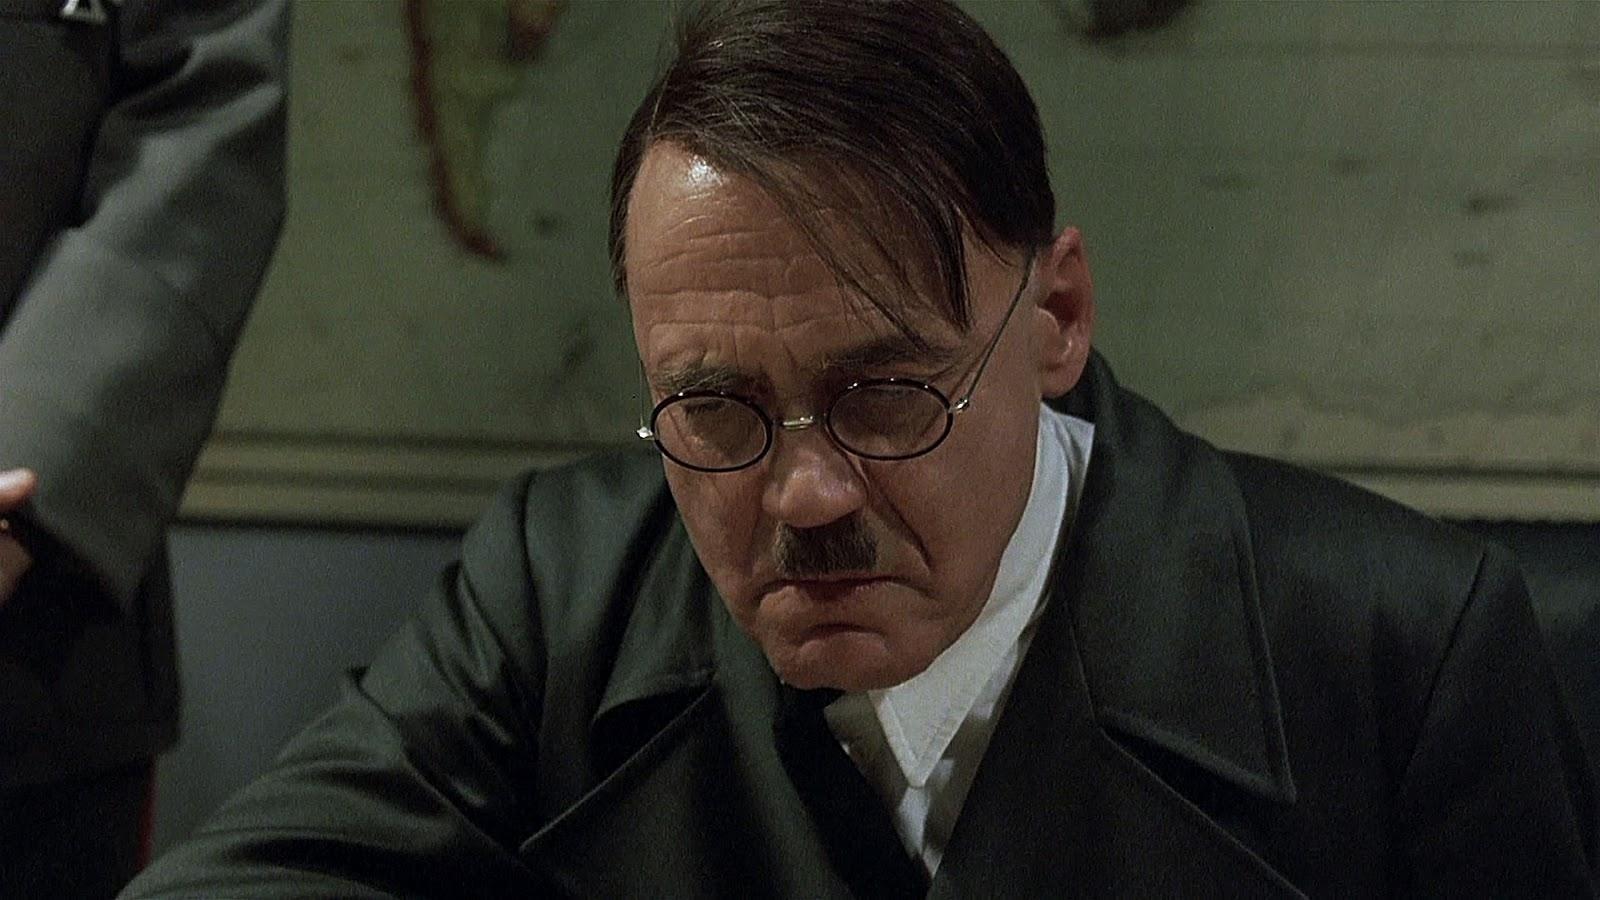 The Downfall: Hitler and the End of the Third Reich  - Stills